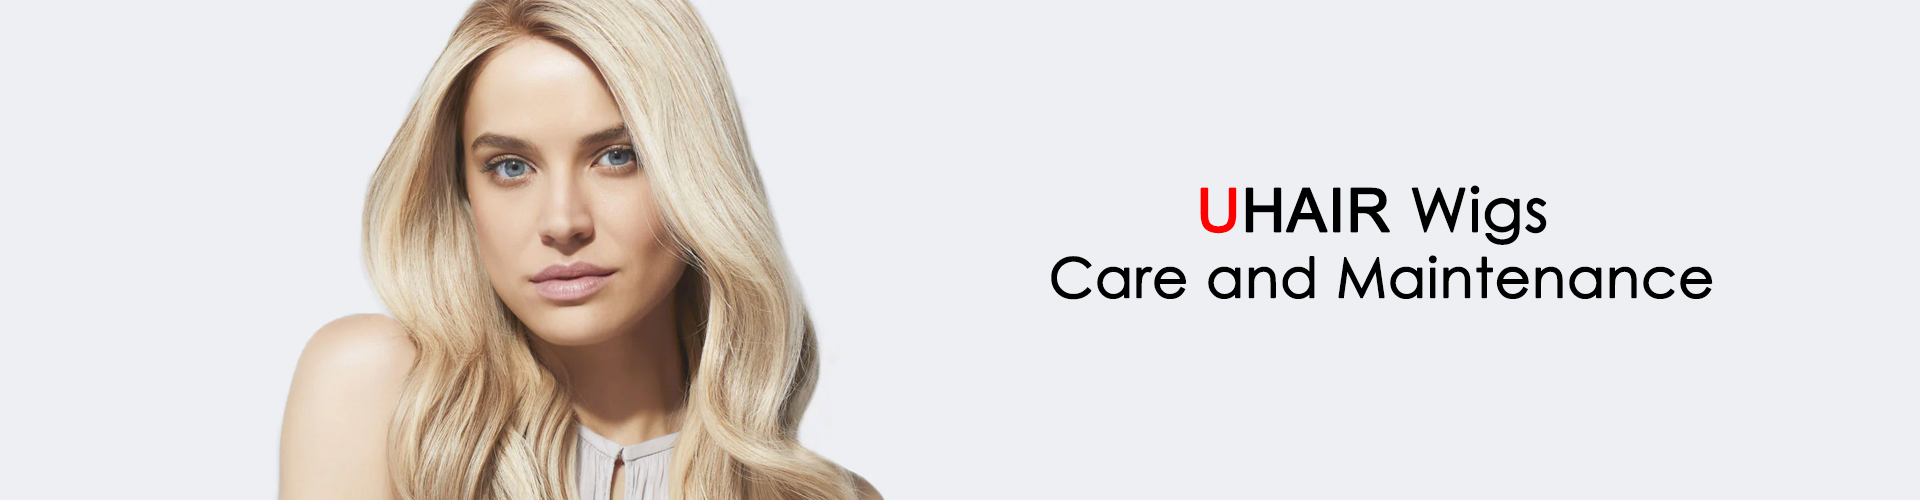 Wigs Care and Maintenance - UHAIR